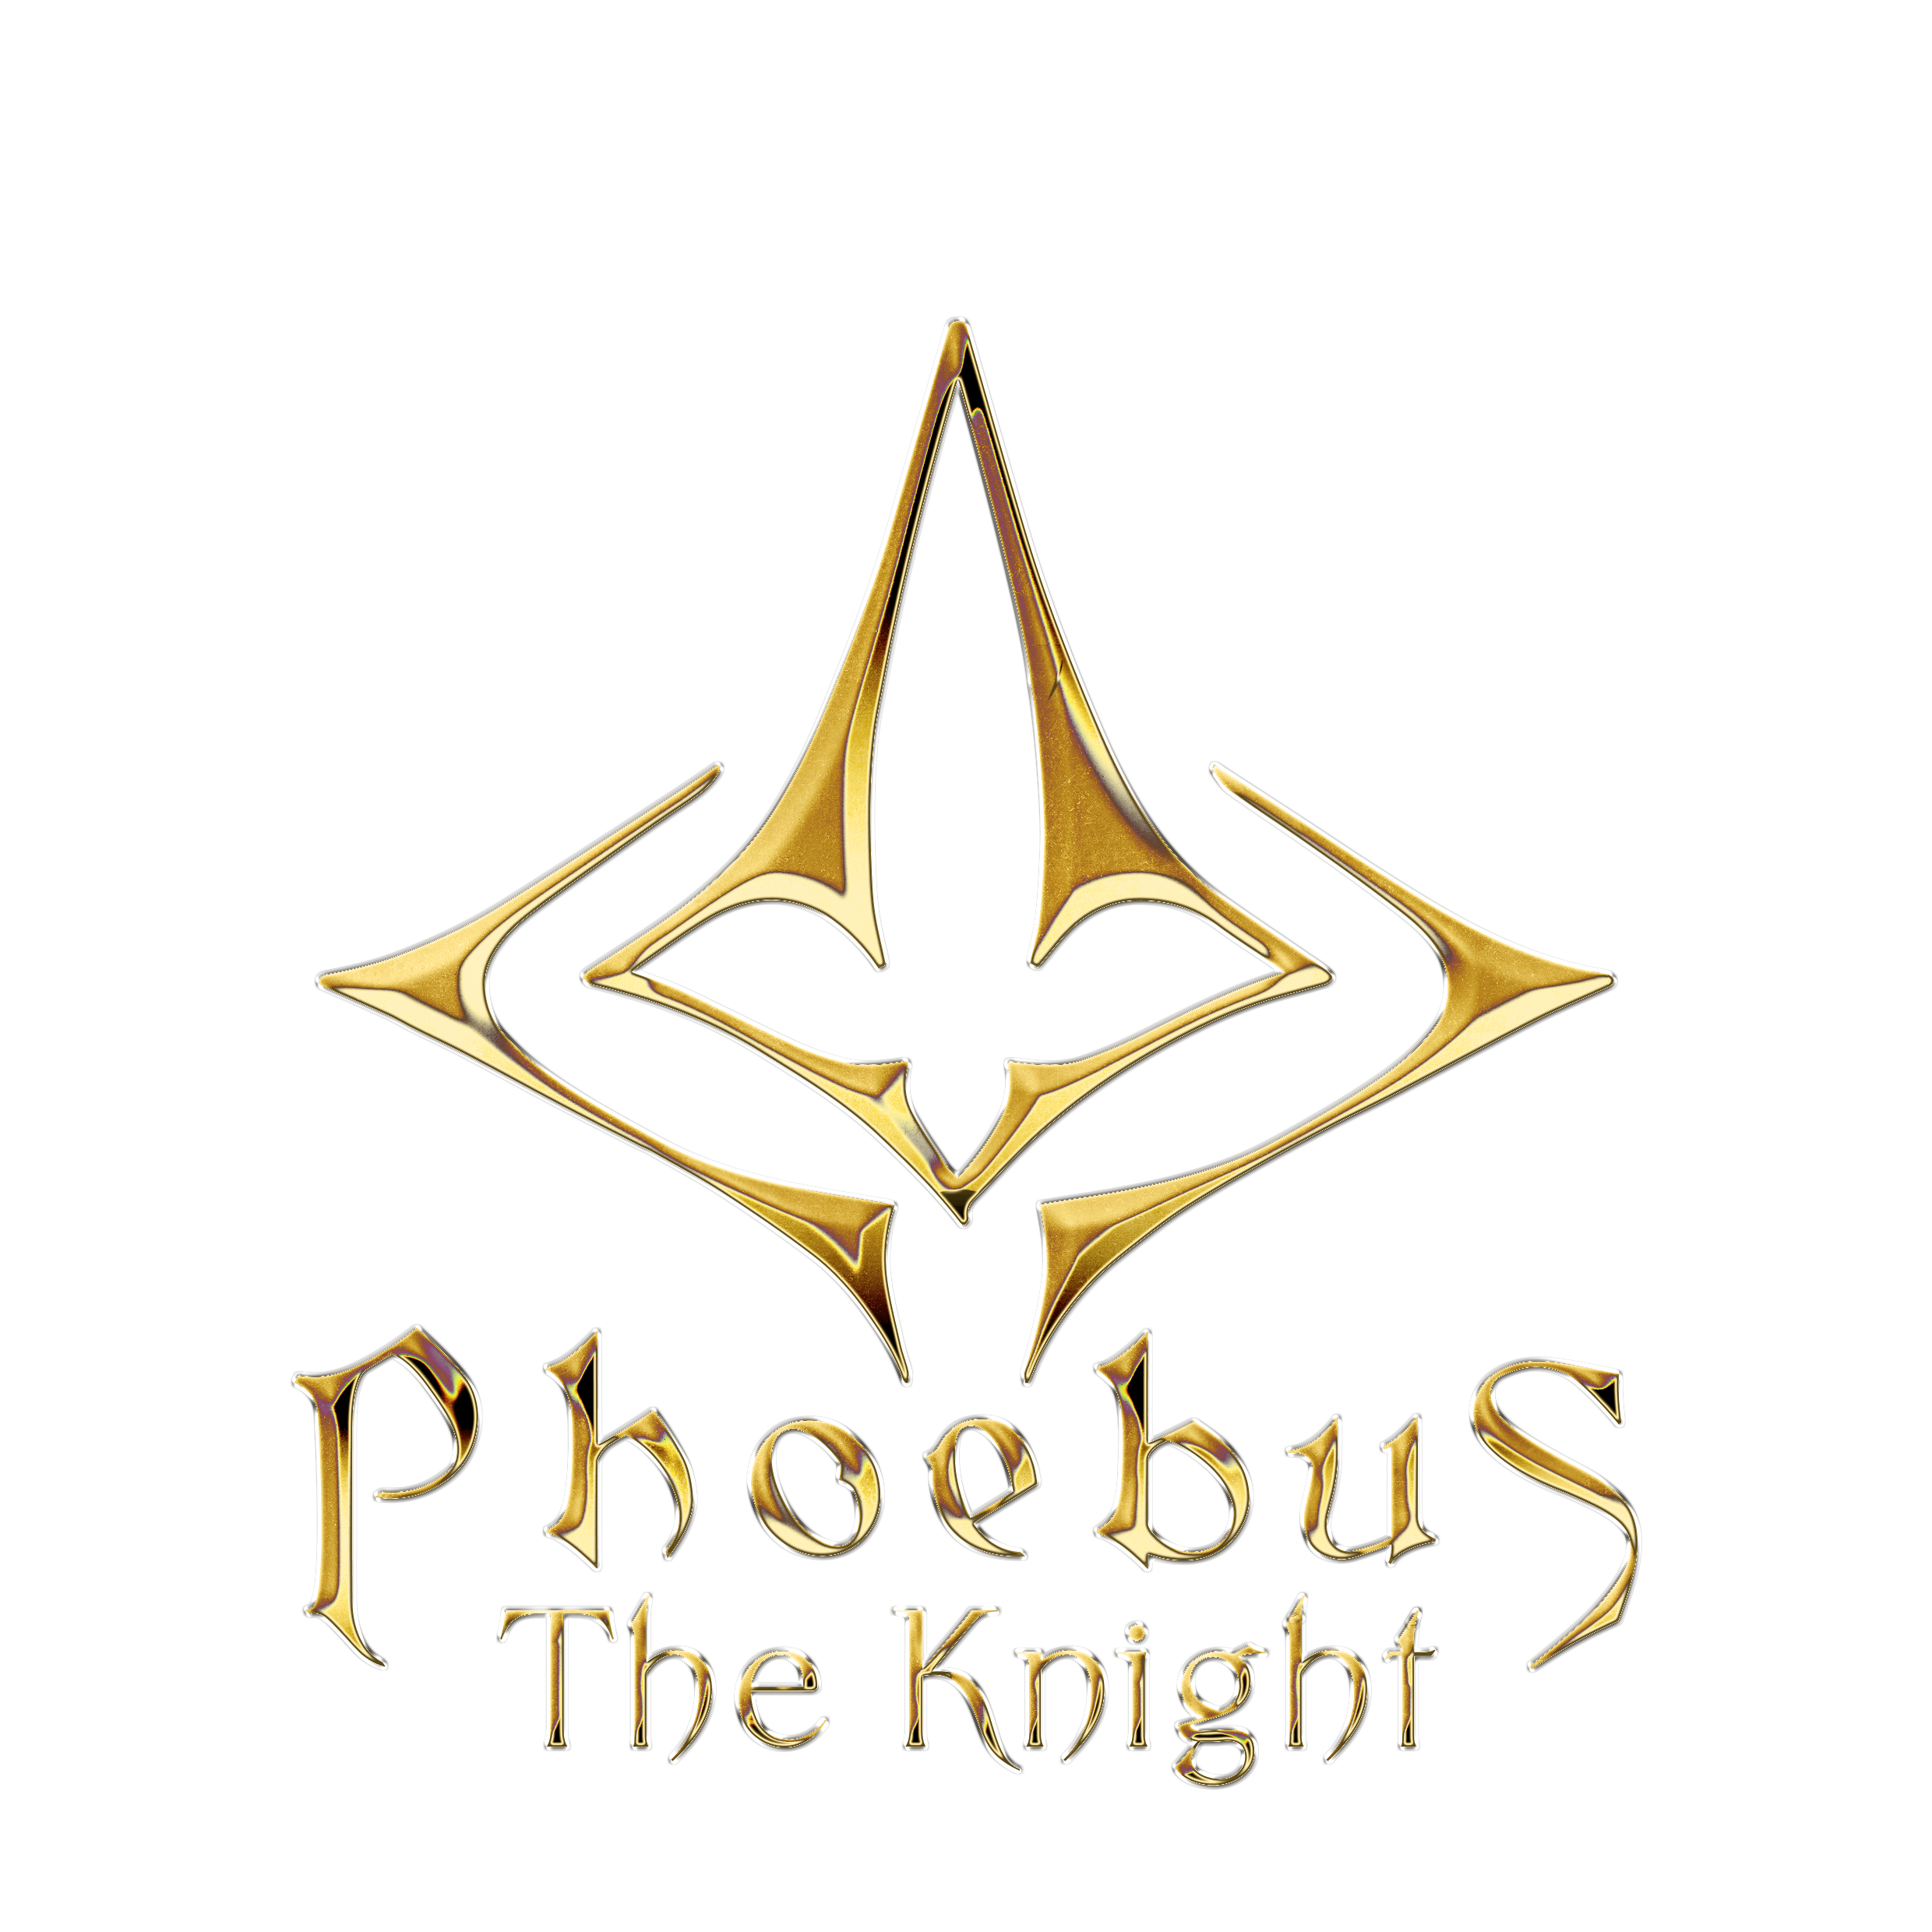 Phoebus the Knight